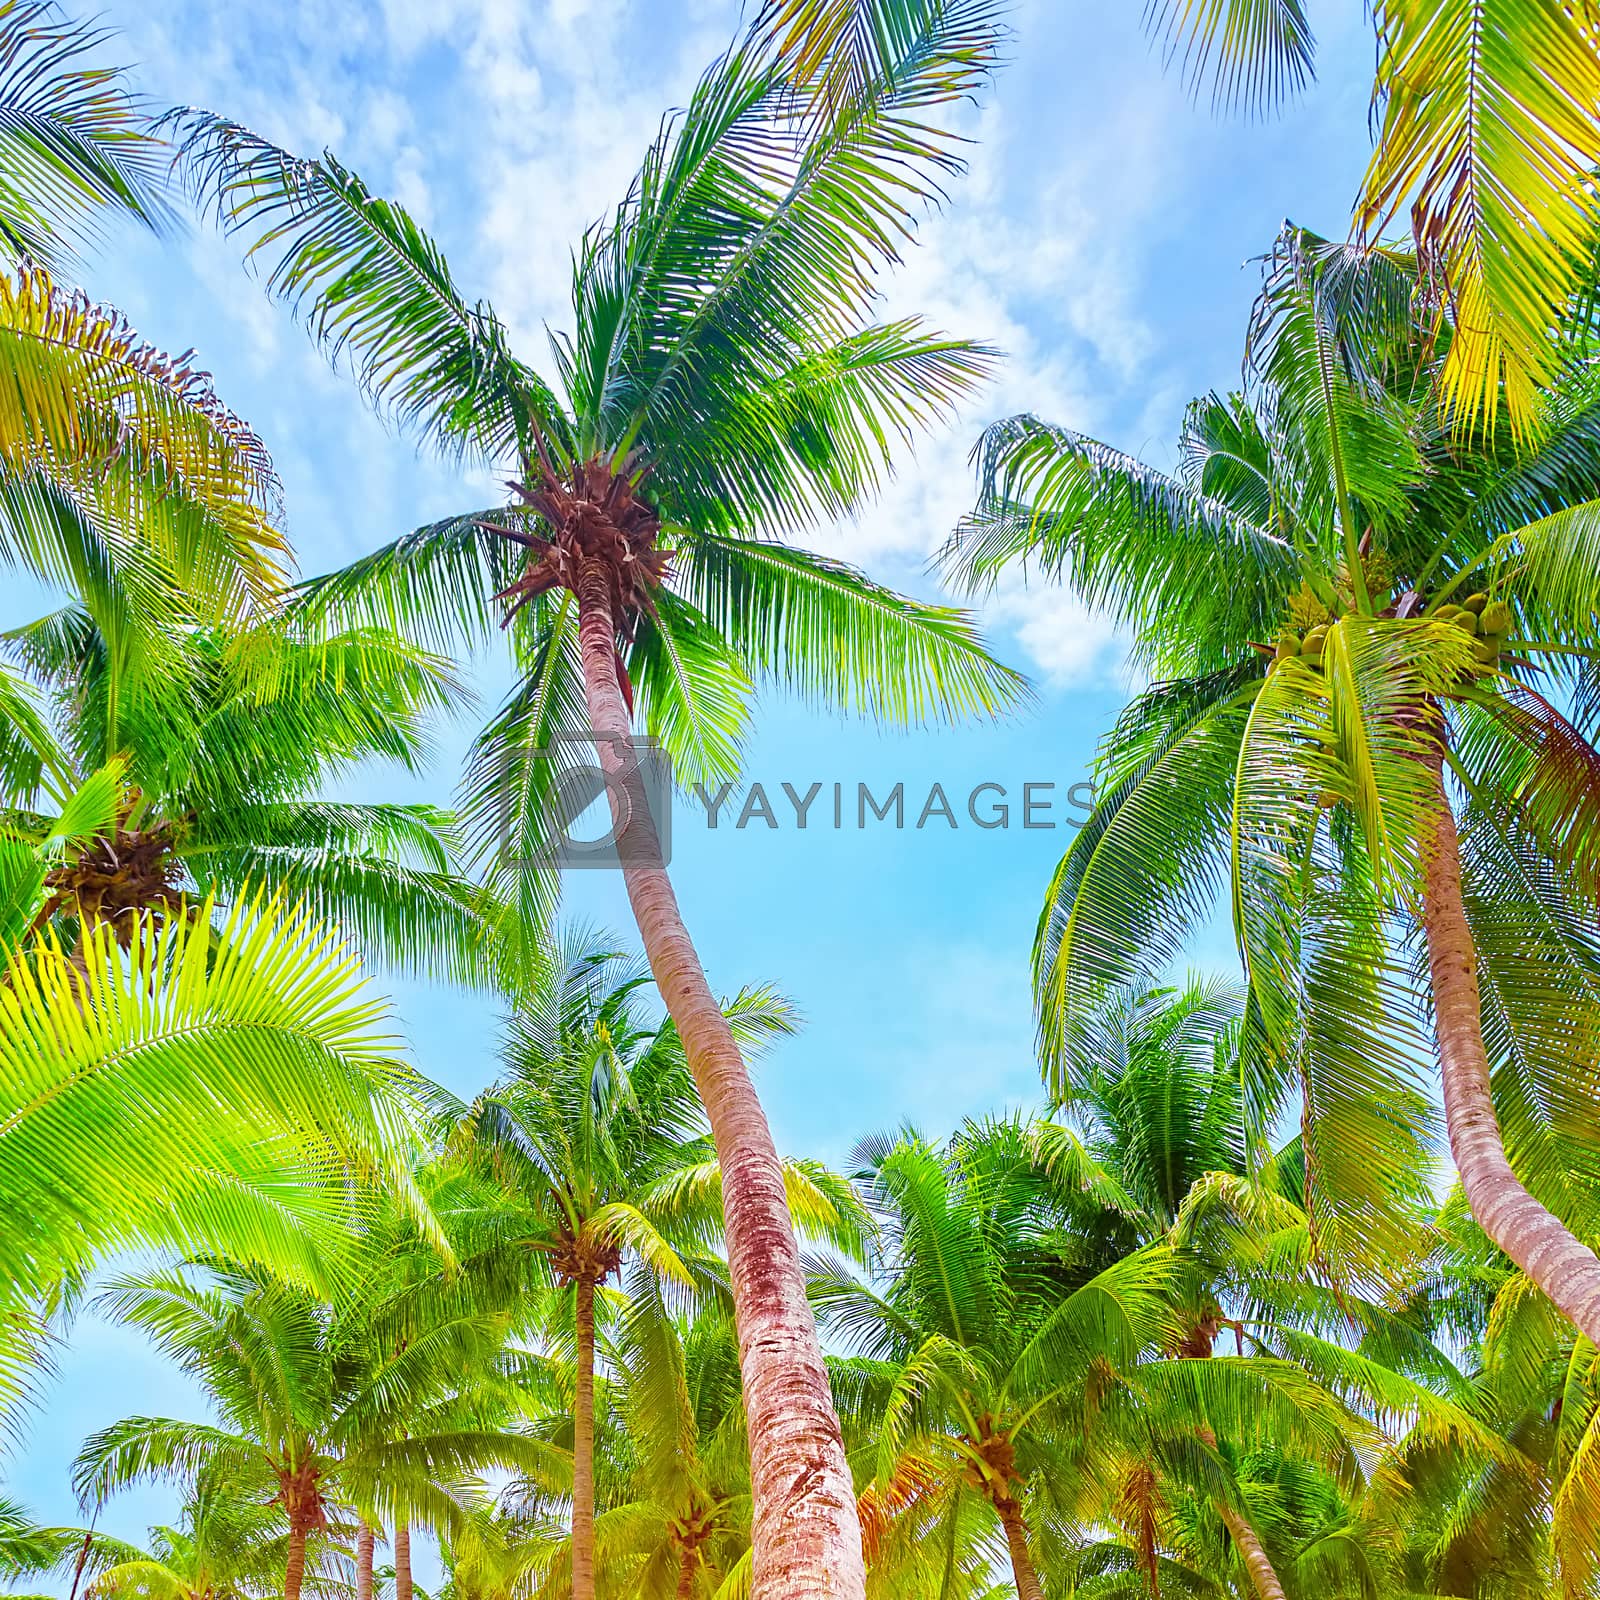 Royalty free image of Fresh green palm trees background by Anna_Omelchenko